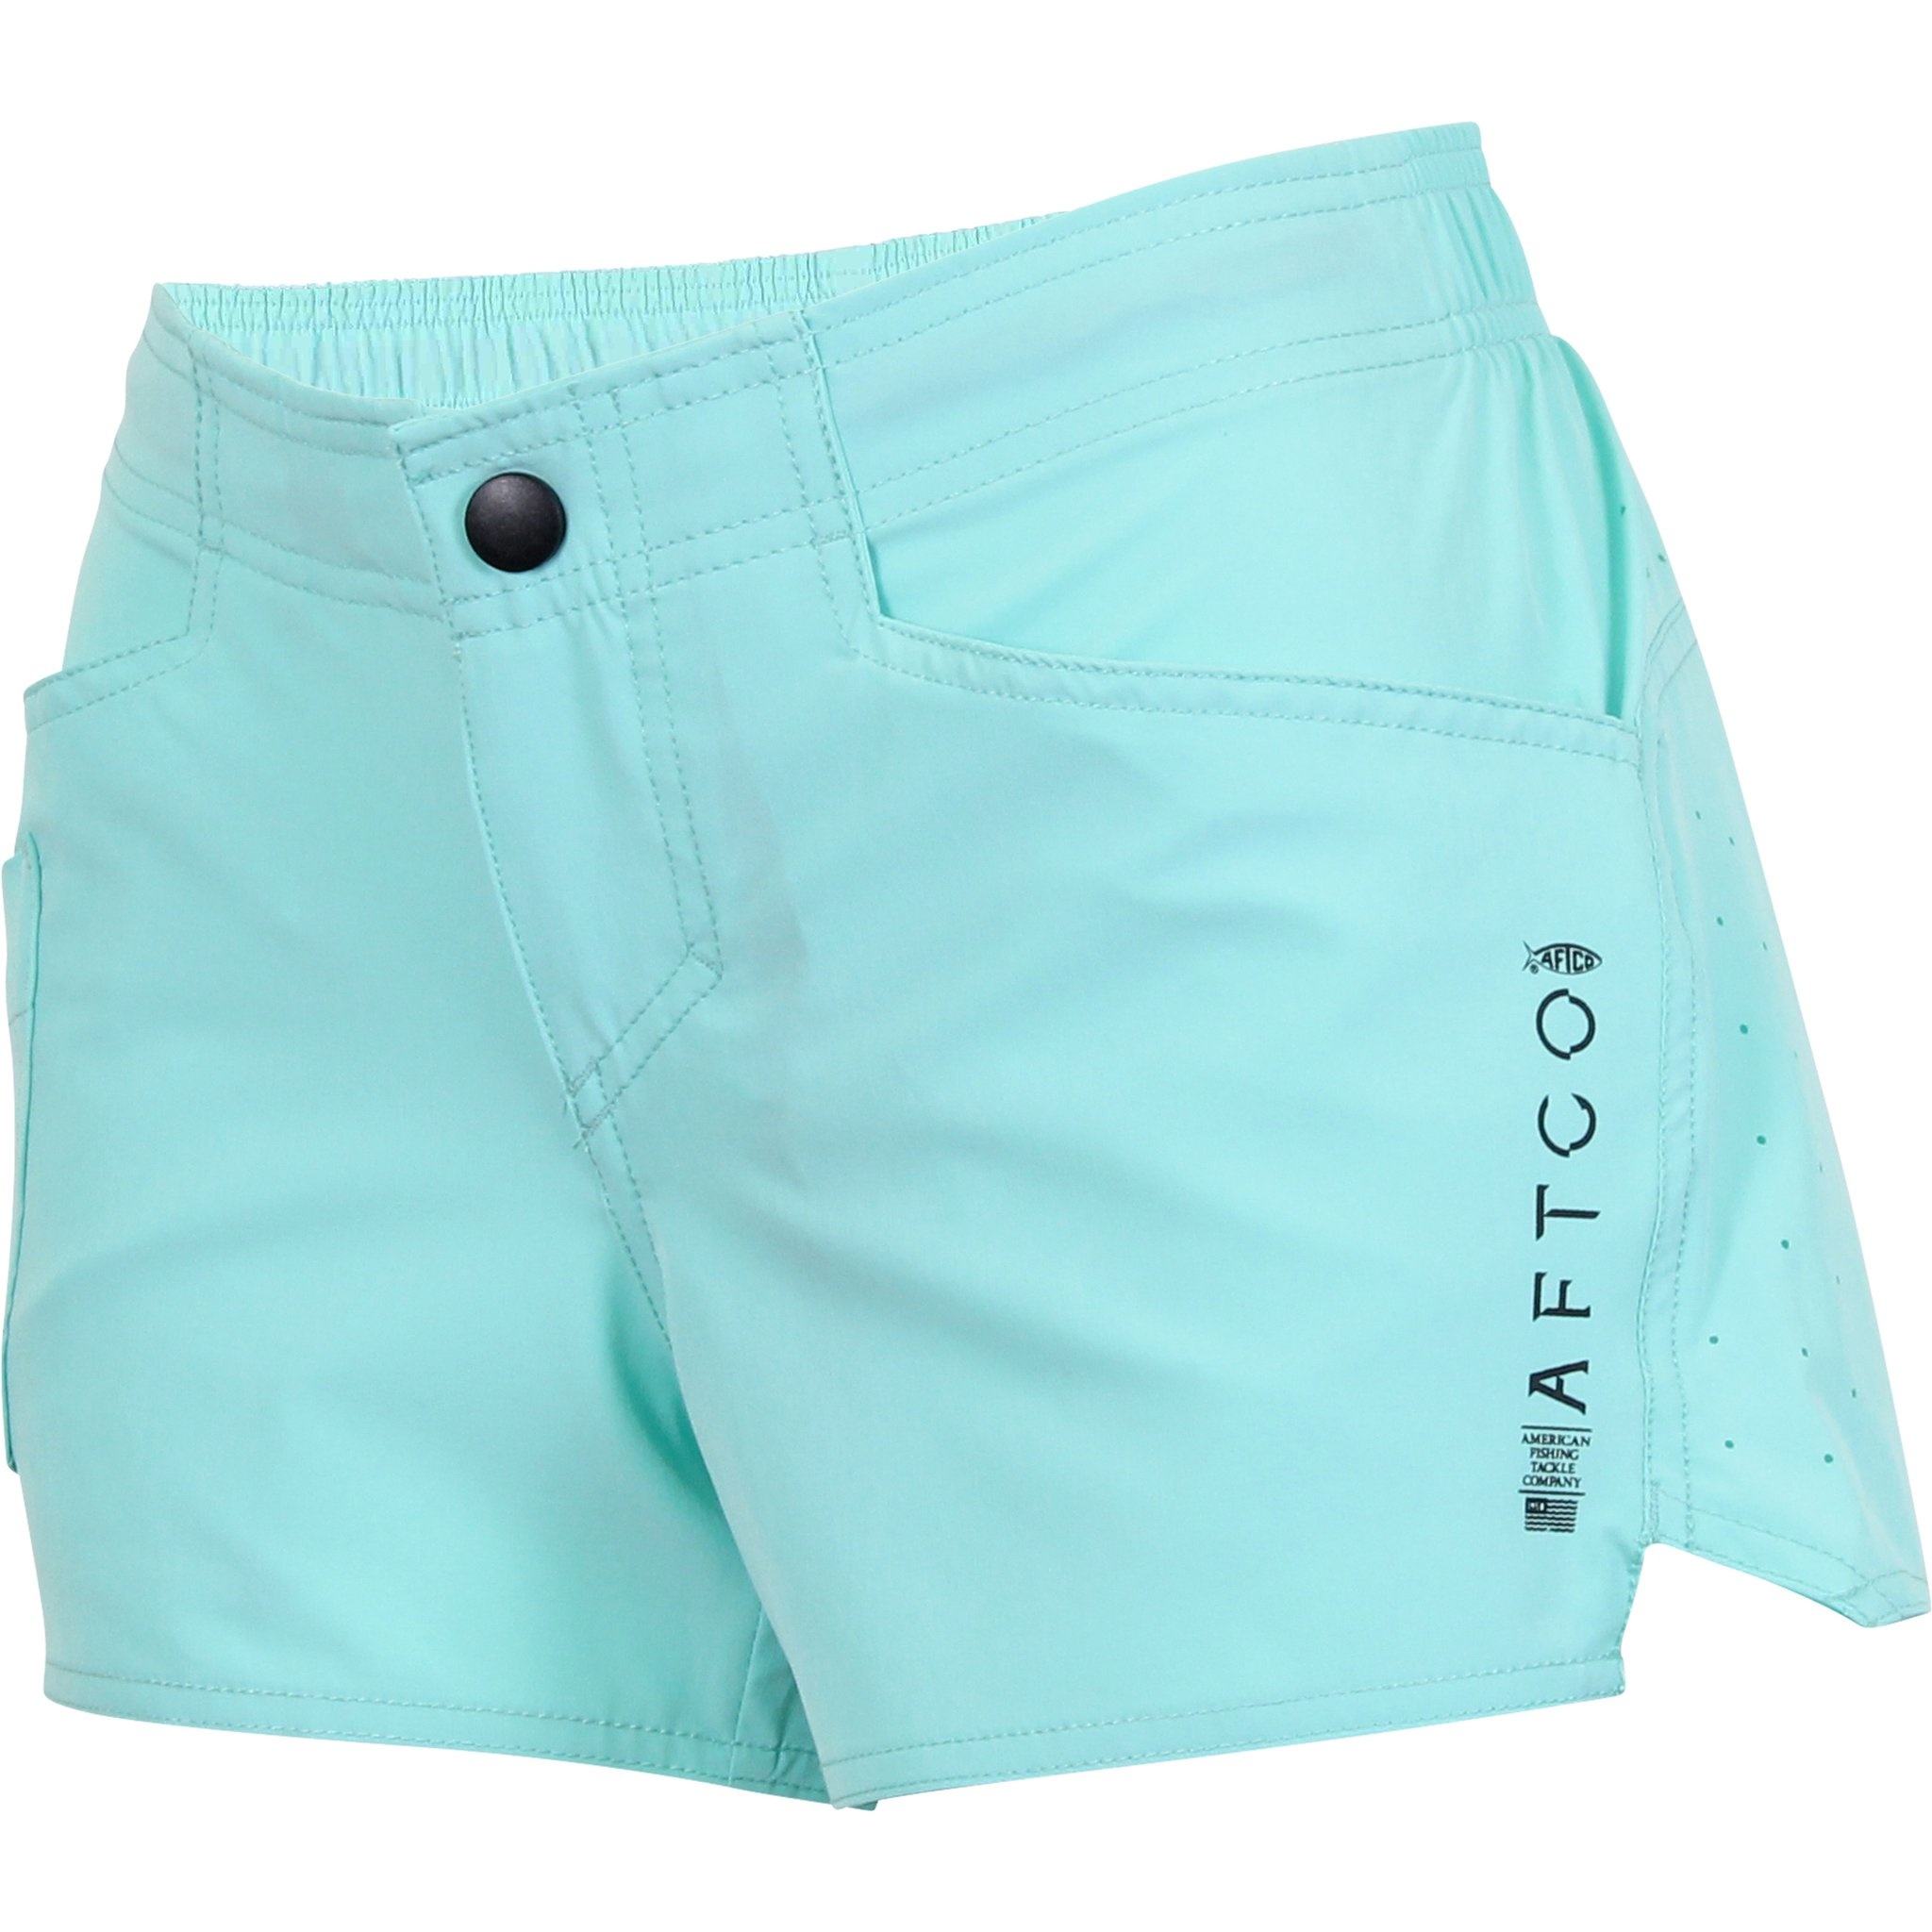 Aftco Women's Microbyte Fishing Shorts Mint - Tackle Center Of